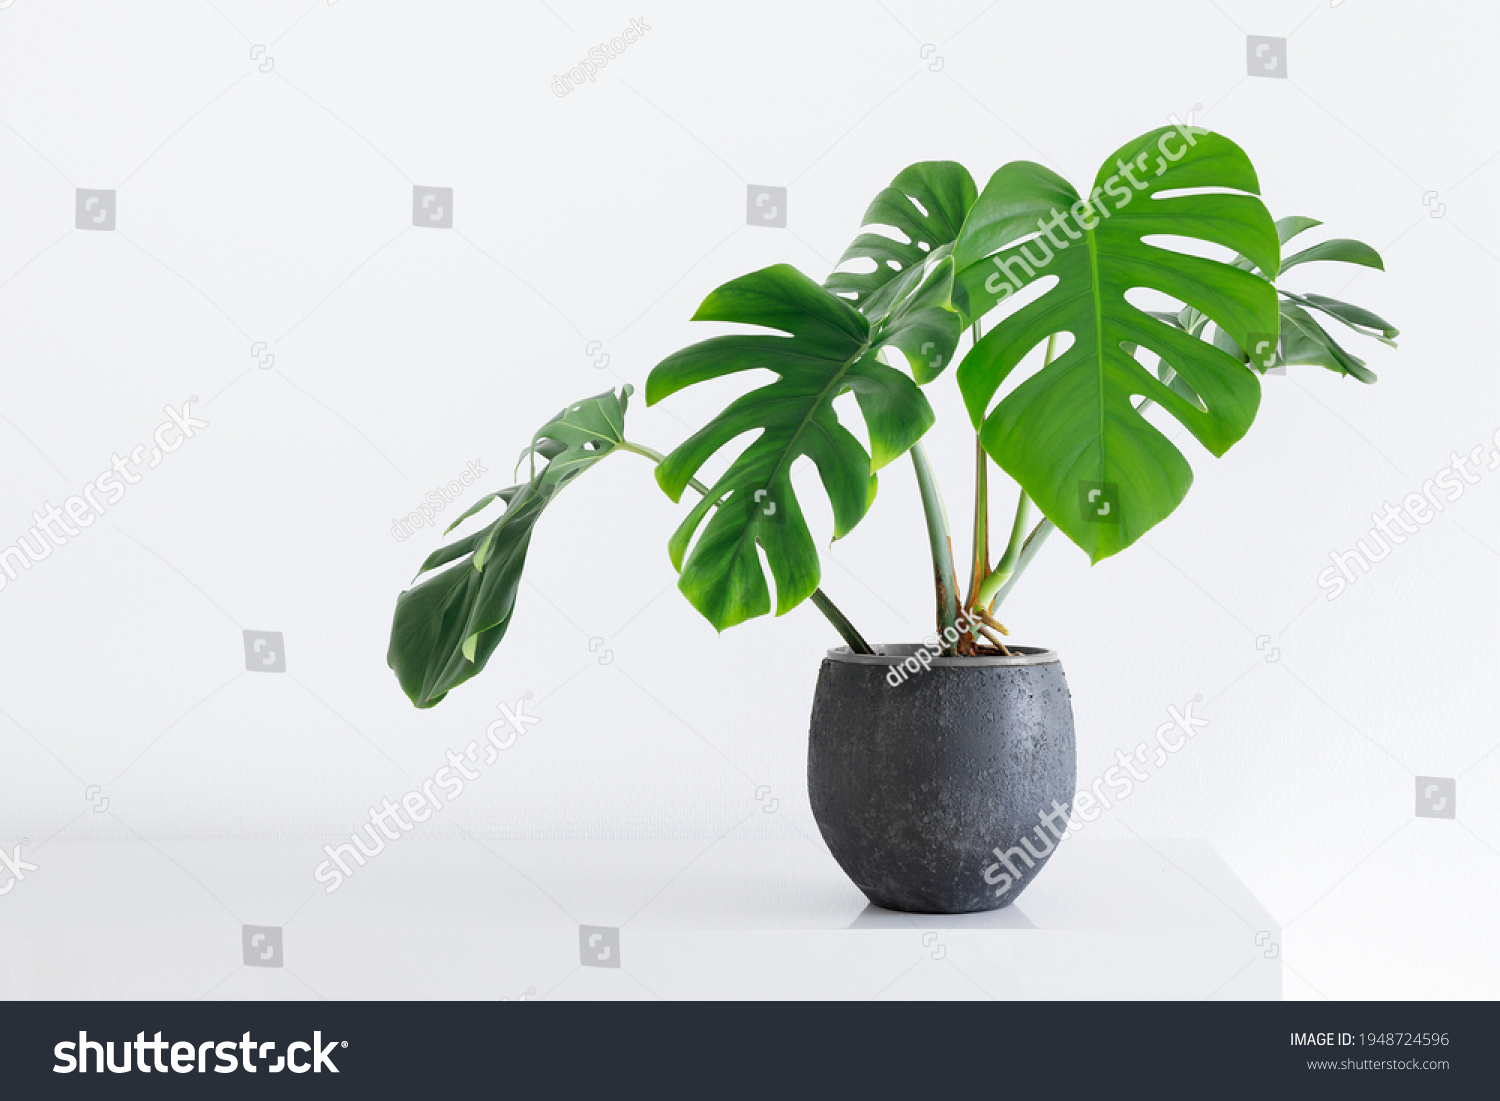 clean image of a large leaf house plant Monstera deliciosa in a gray pot on a white background #1948724596